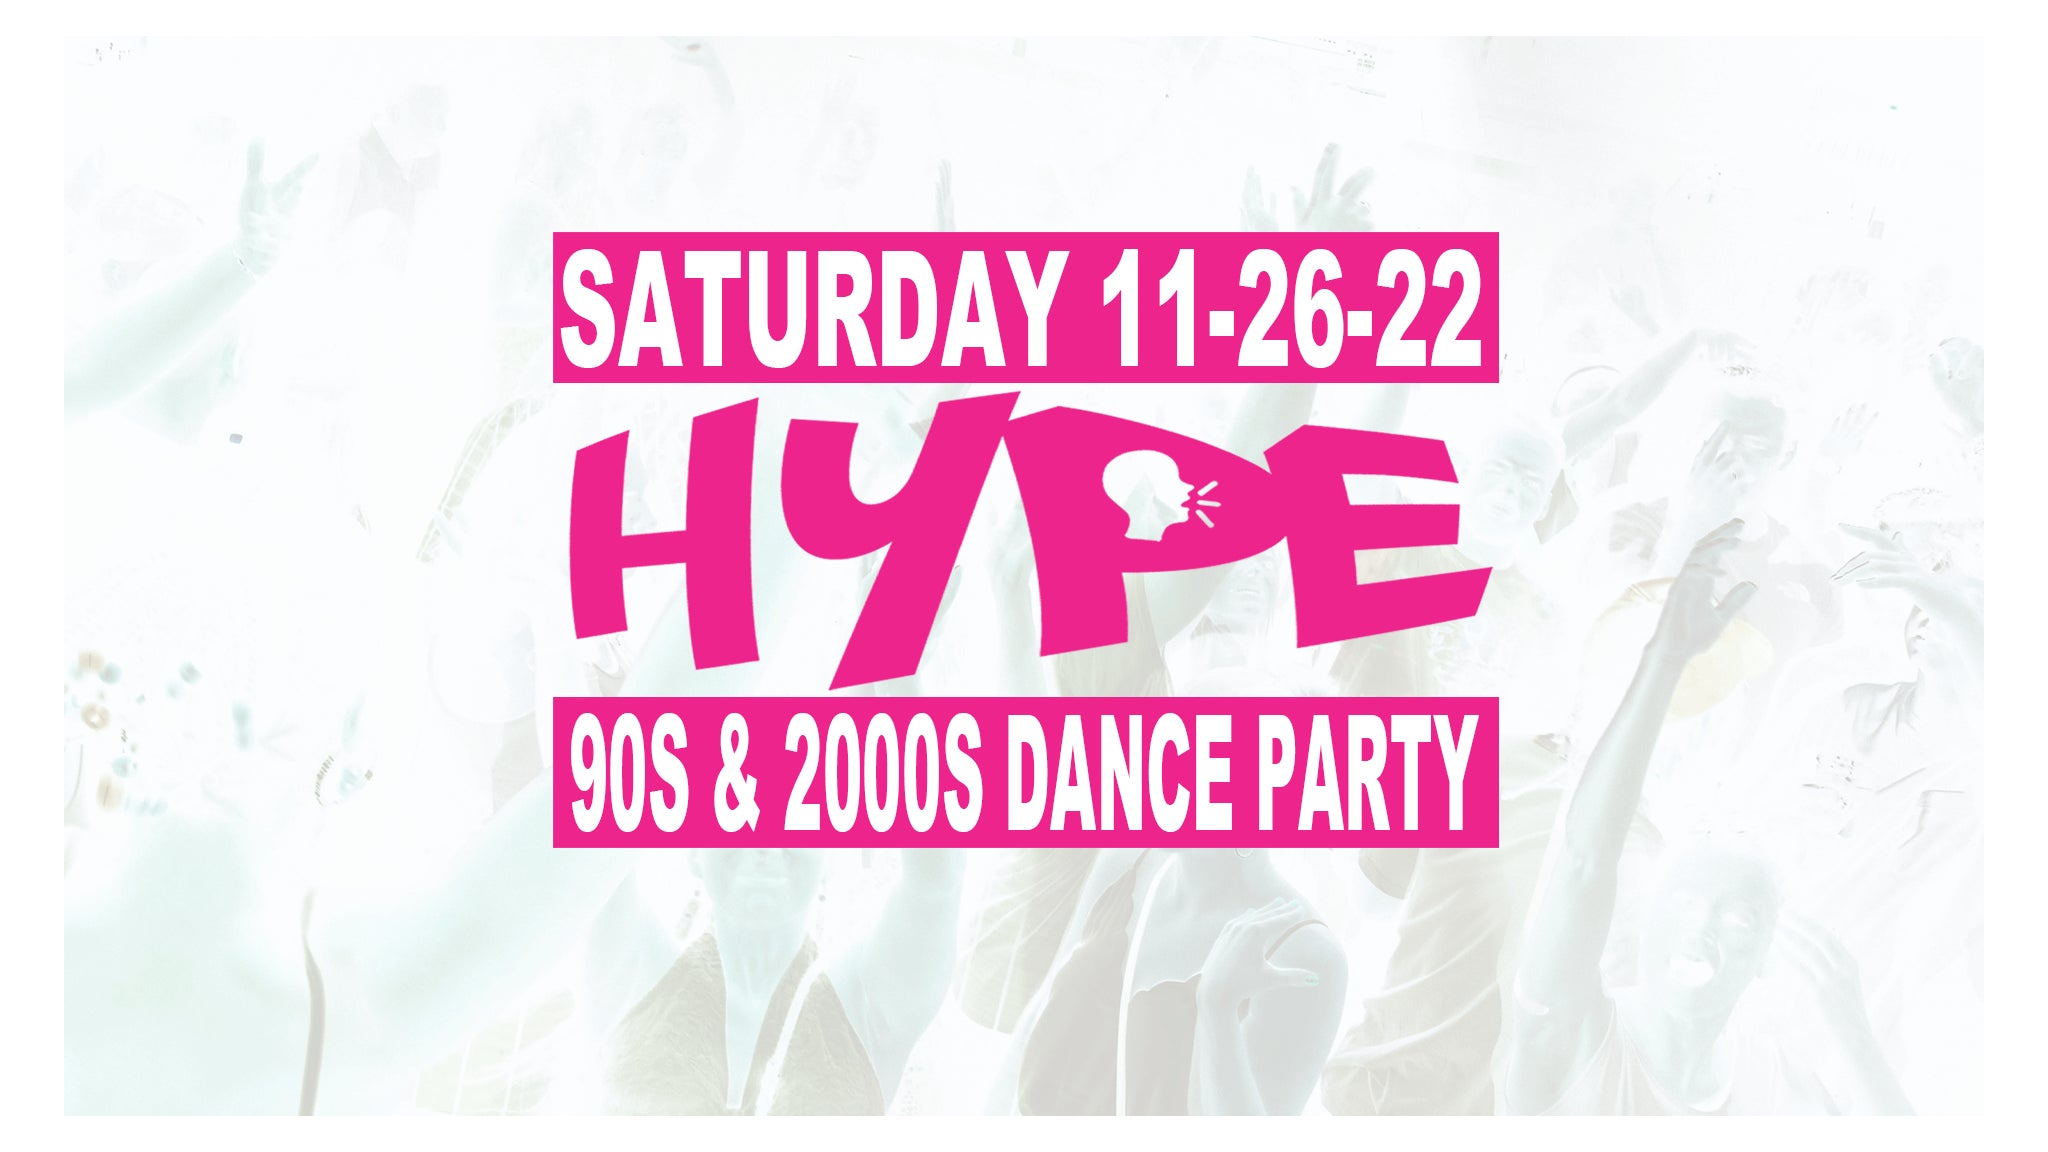 Hype 90s & 2000s Dance Party at Ophelia's Electric Soapbox